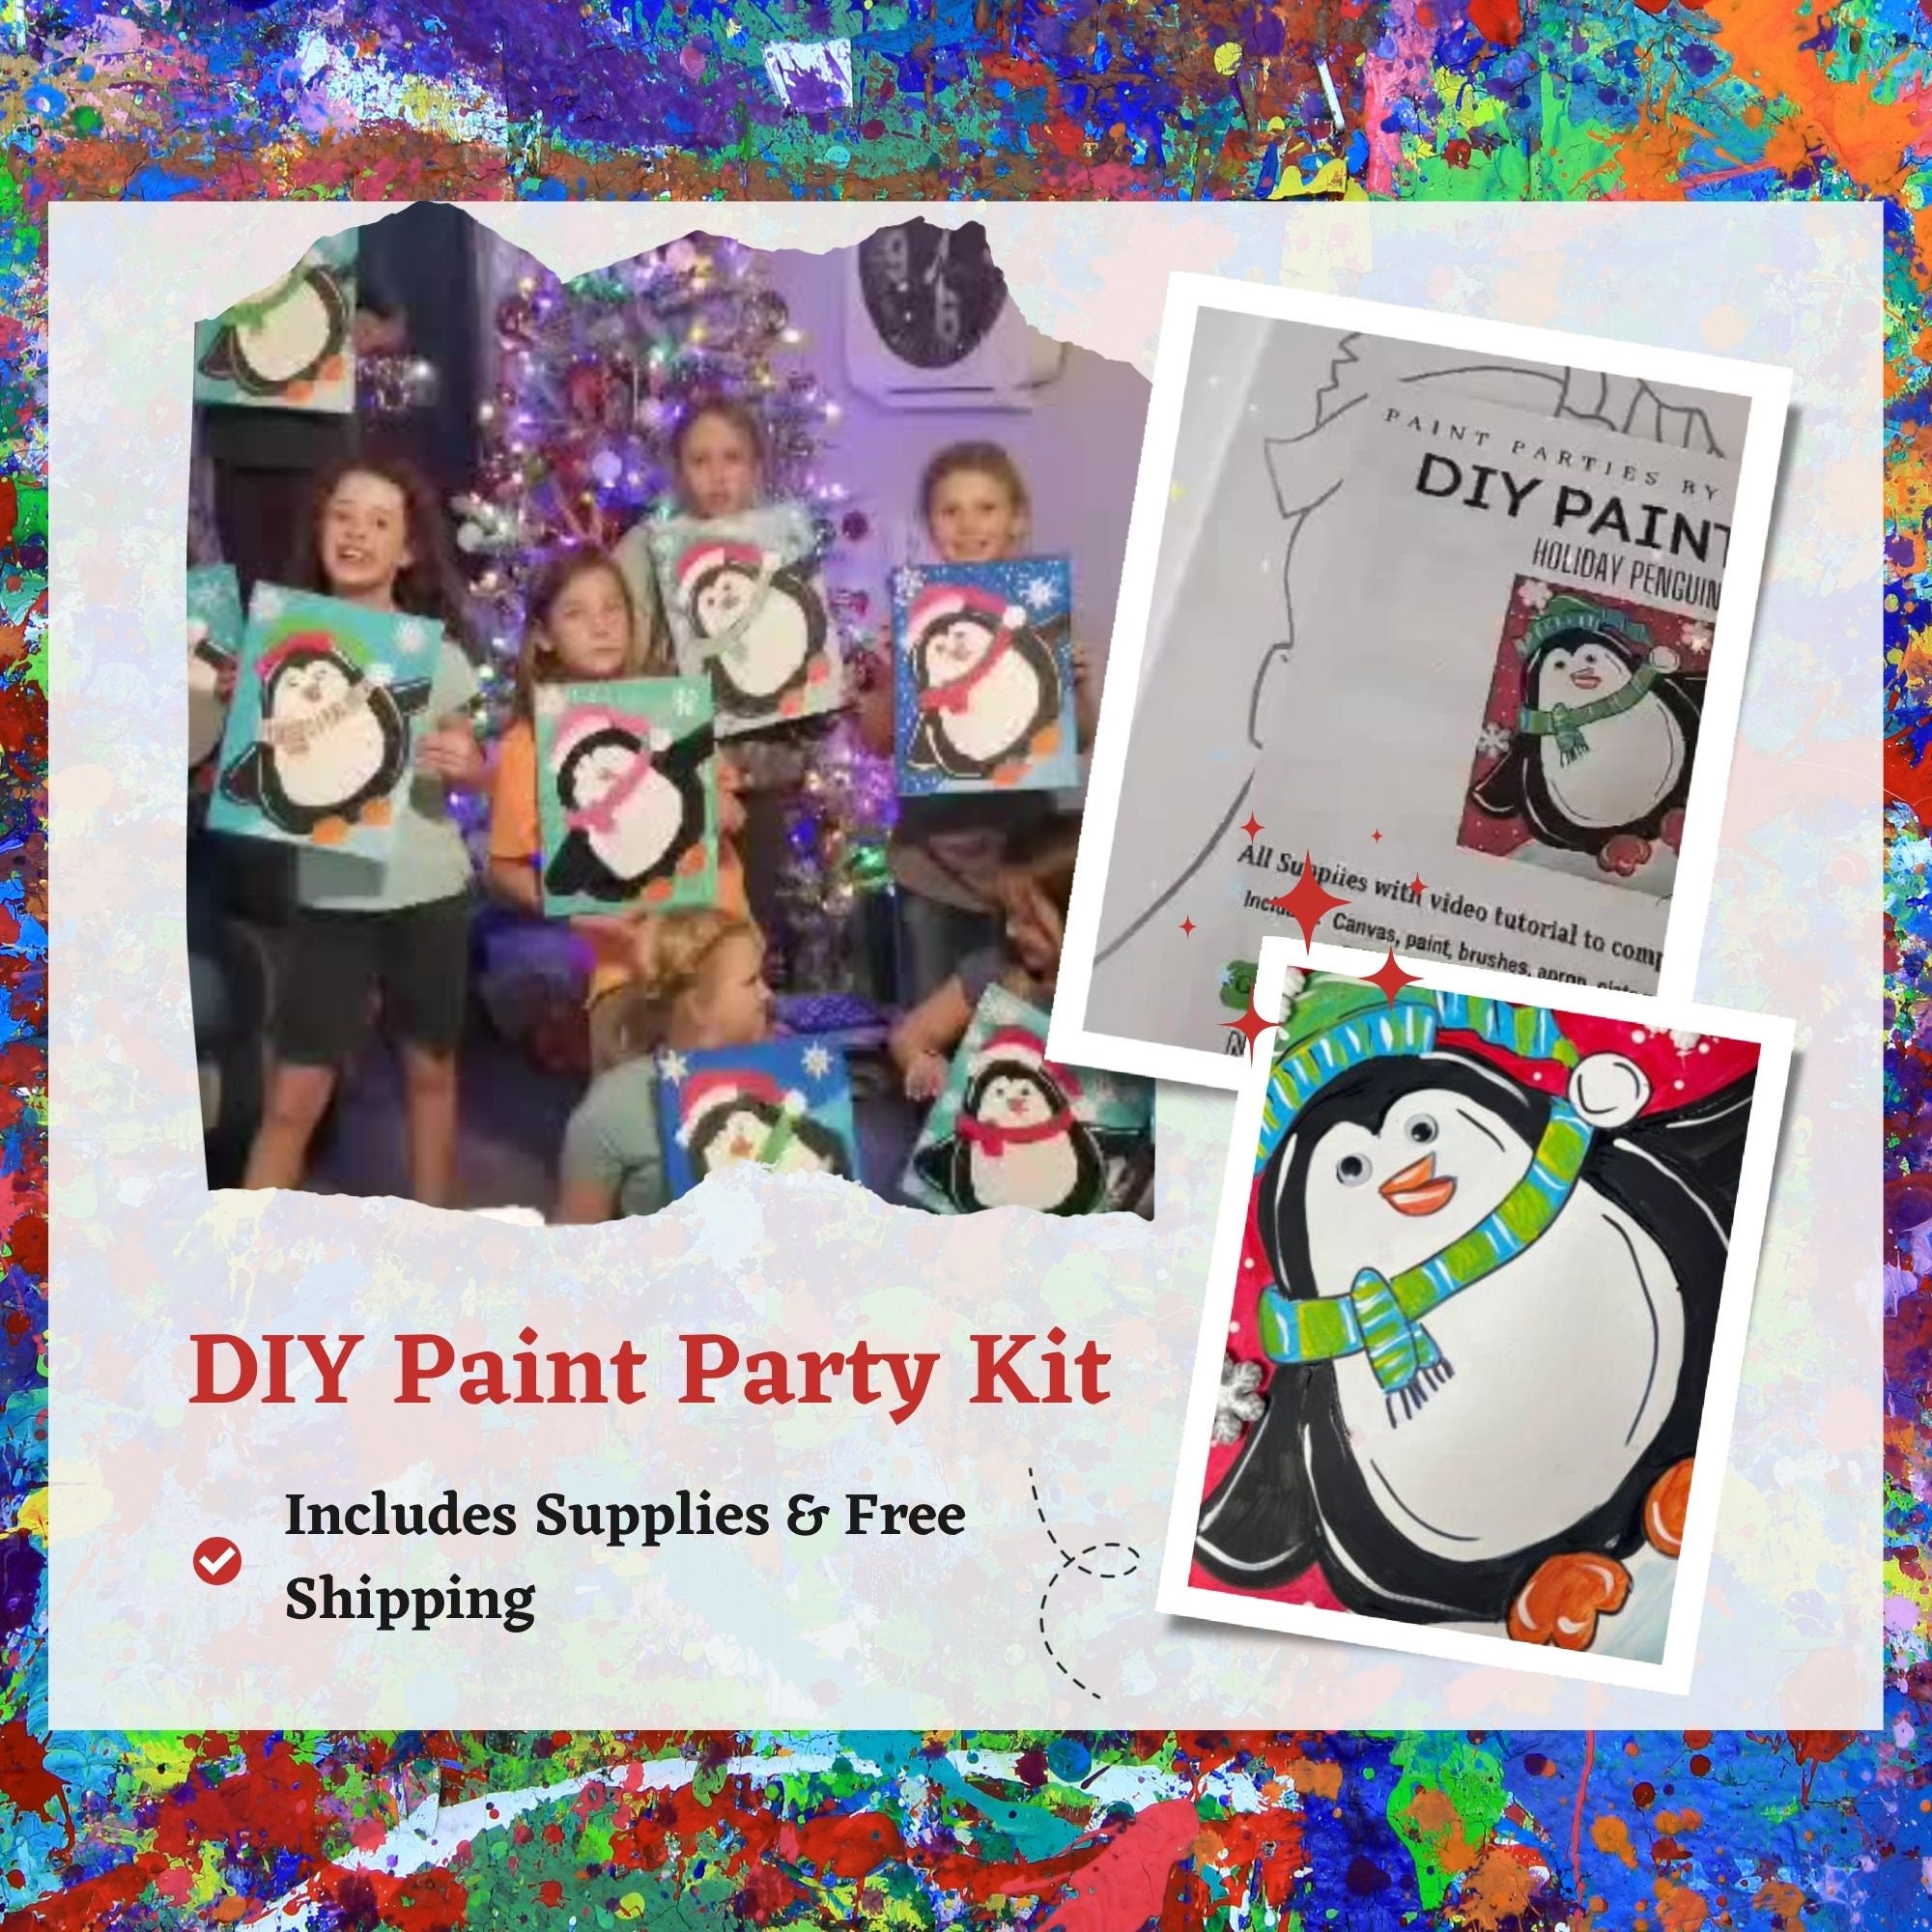 Honey Bear DIY Paint Art Party Kit-Includes ALL Supplies with Video  Tutorial and Free Shipping makes the perfect gift or DIY Paint Party!